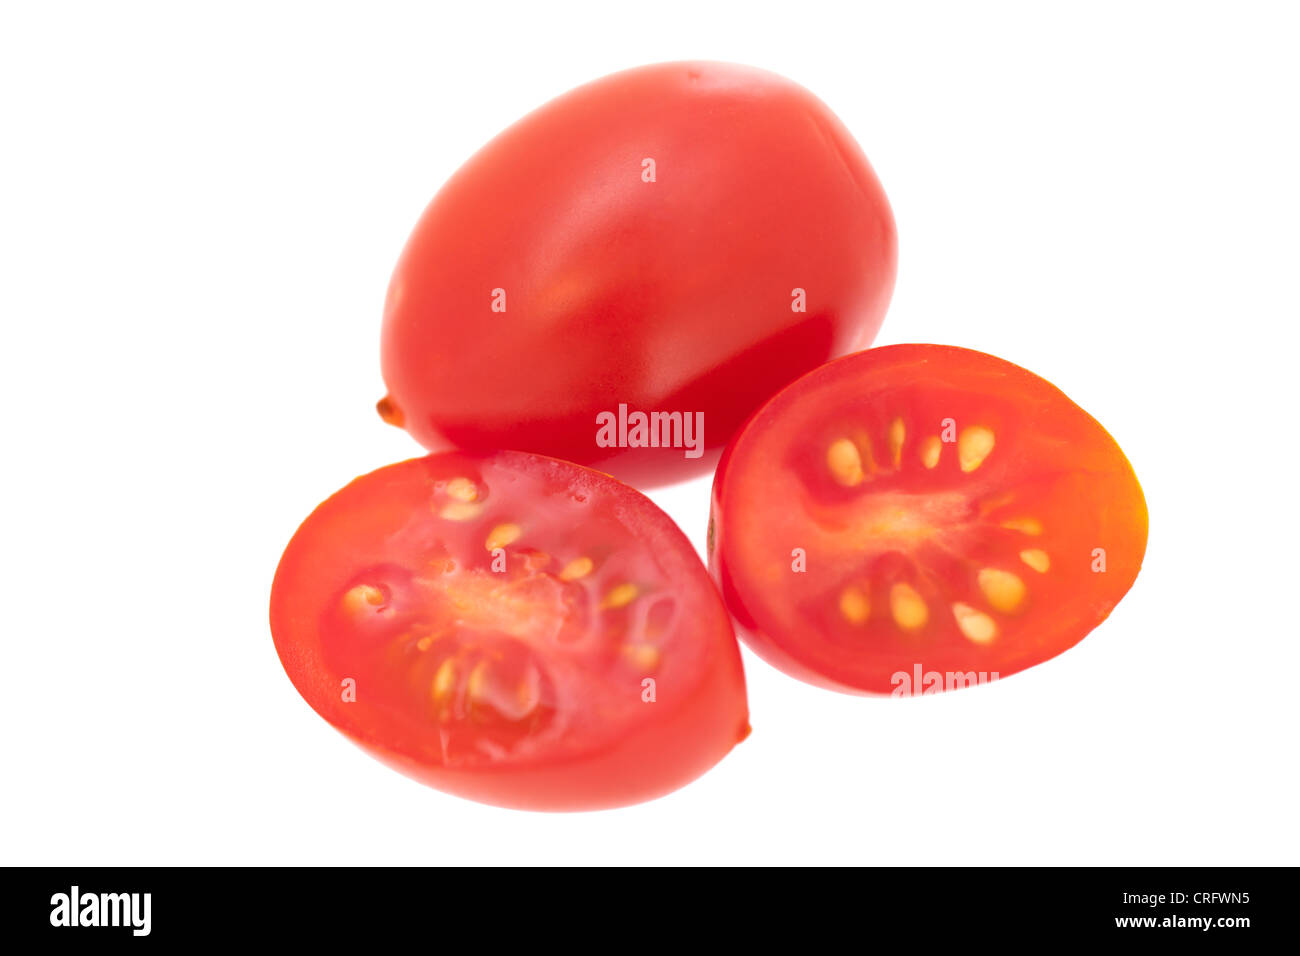 Small halved red tomato Stock Photo